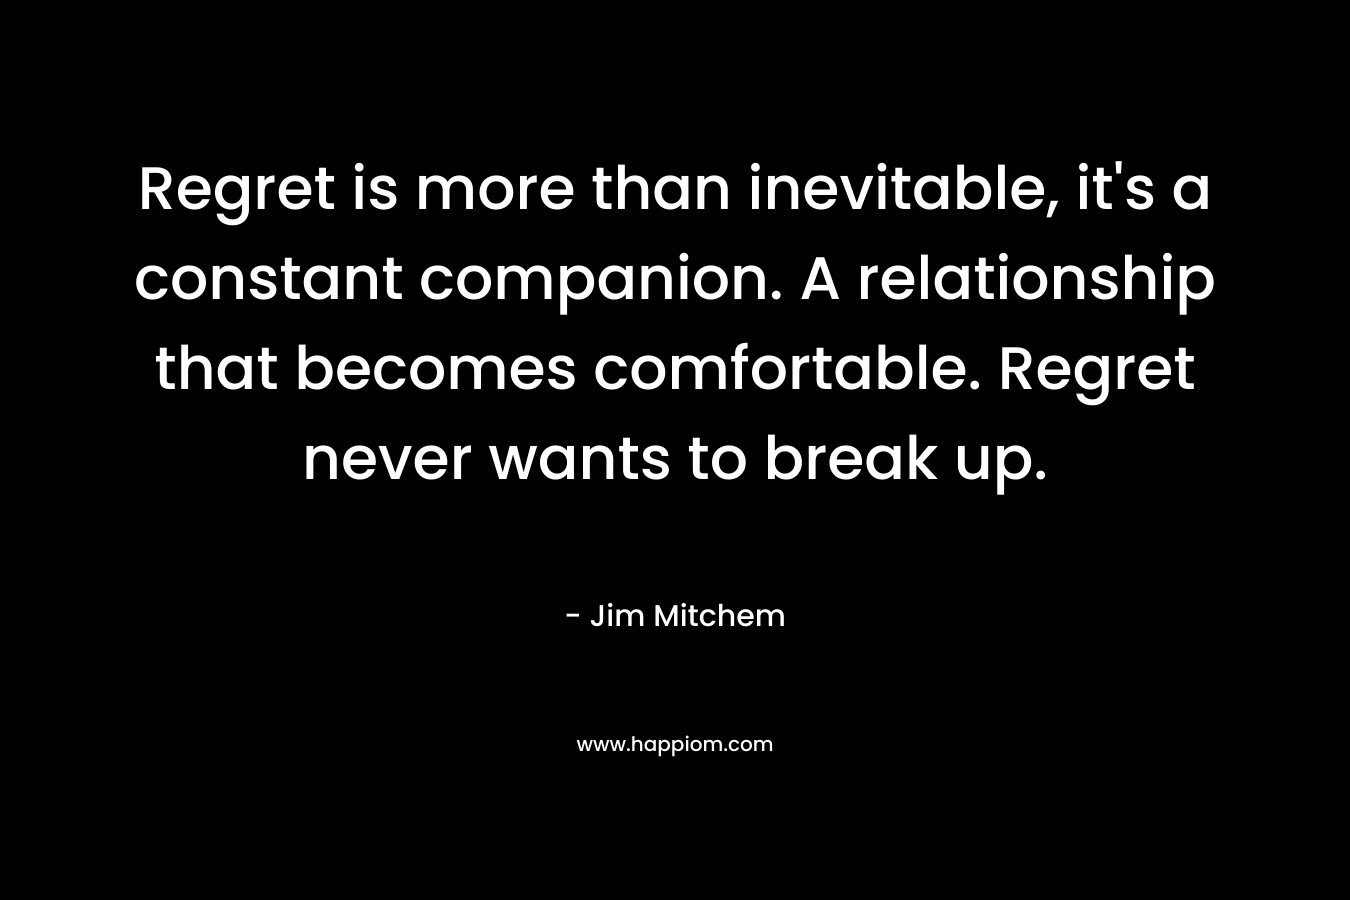 Regret is more than inevitable, it's a constant companion. A relationship that becomes comfortable. Regret never wants to break up.